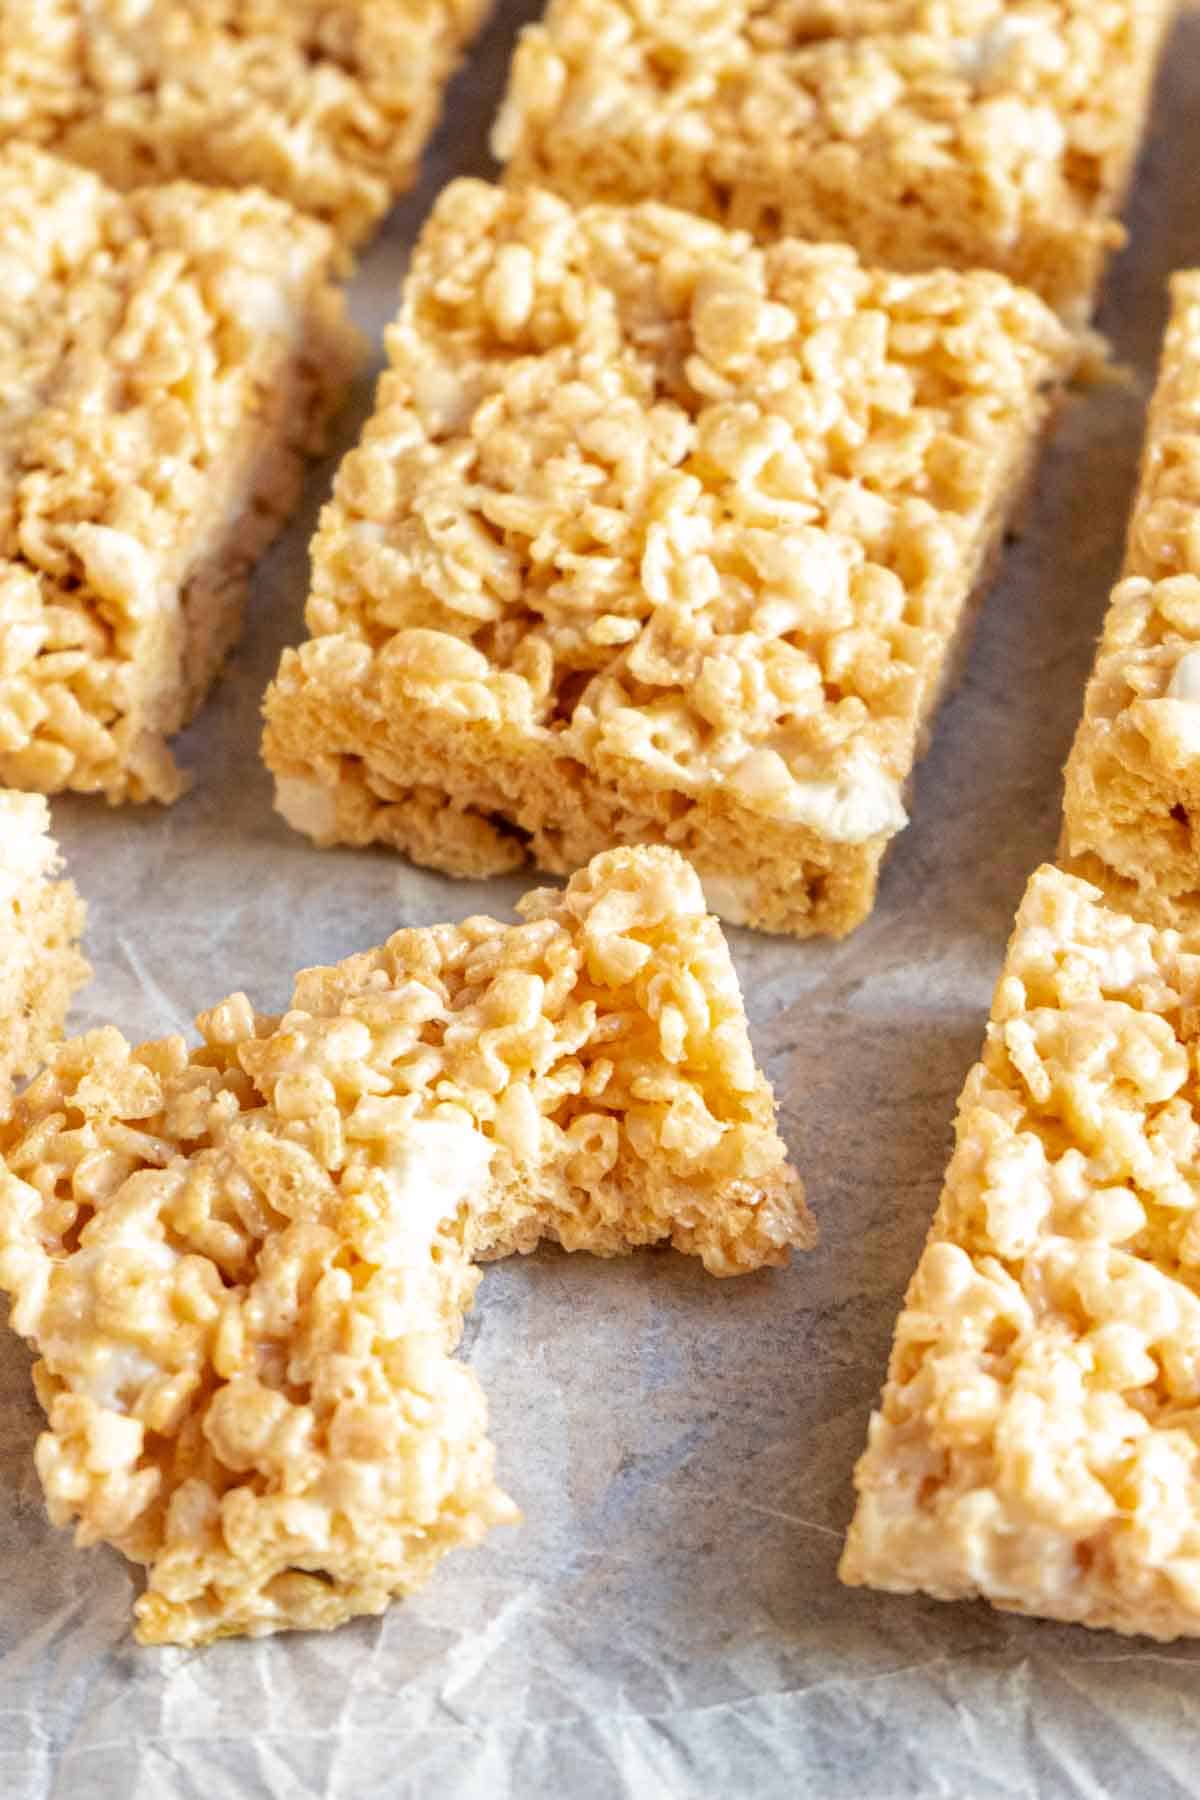 Rice krispies treat with a bite taken out of it.